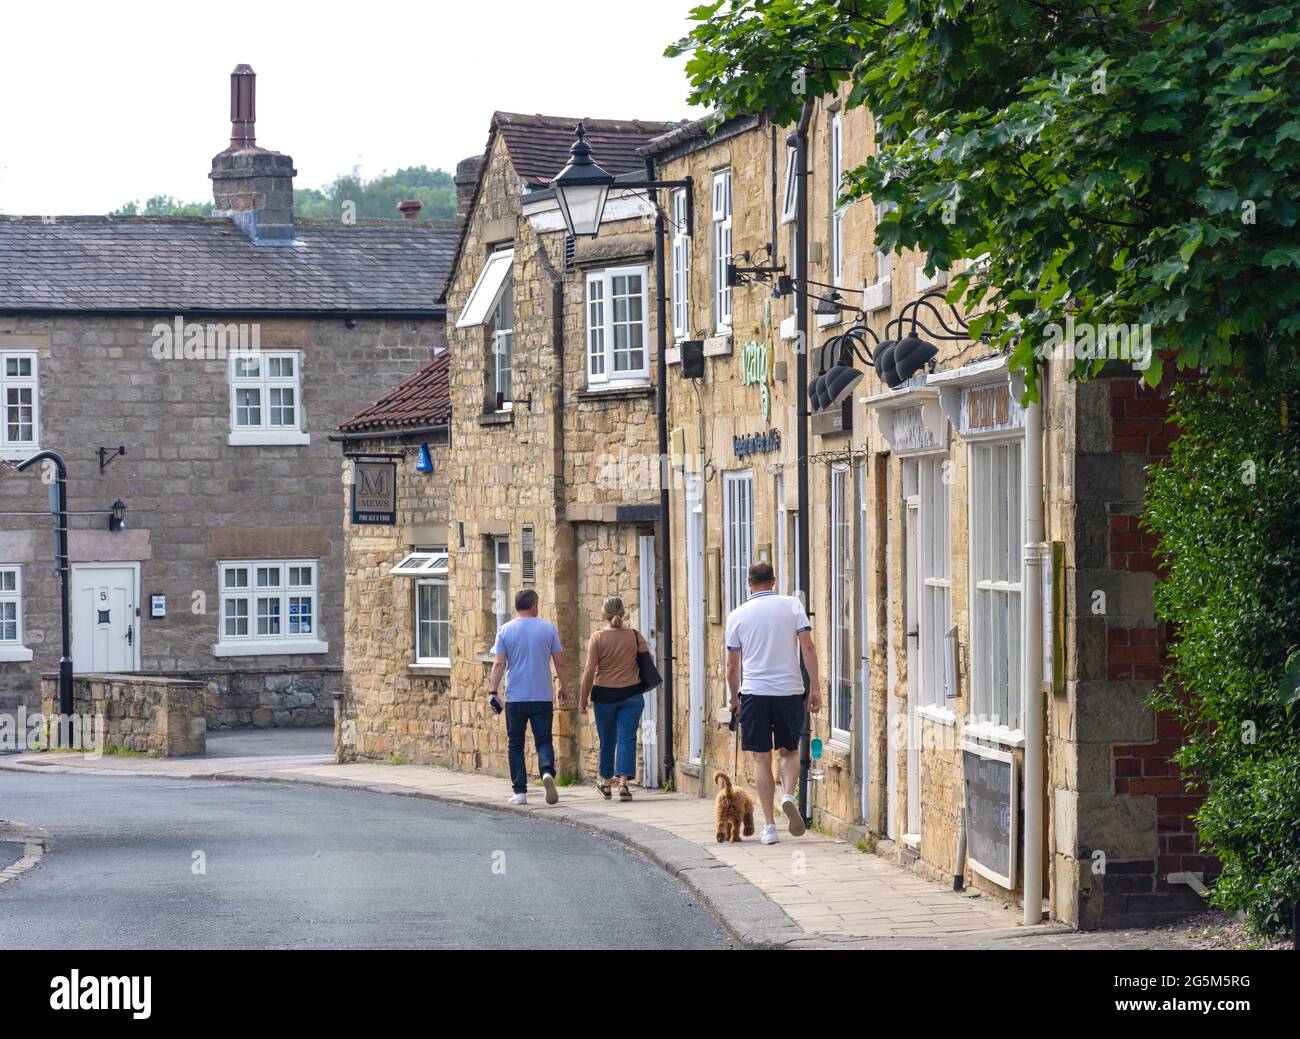 Wetherby West Yorkshire High Resolution Stock Photography and Images - Alamy